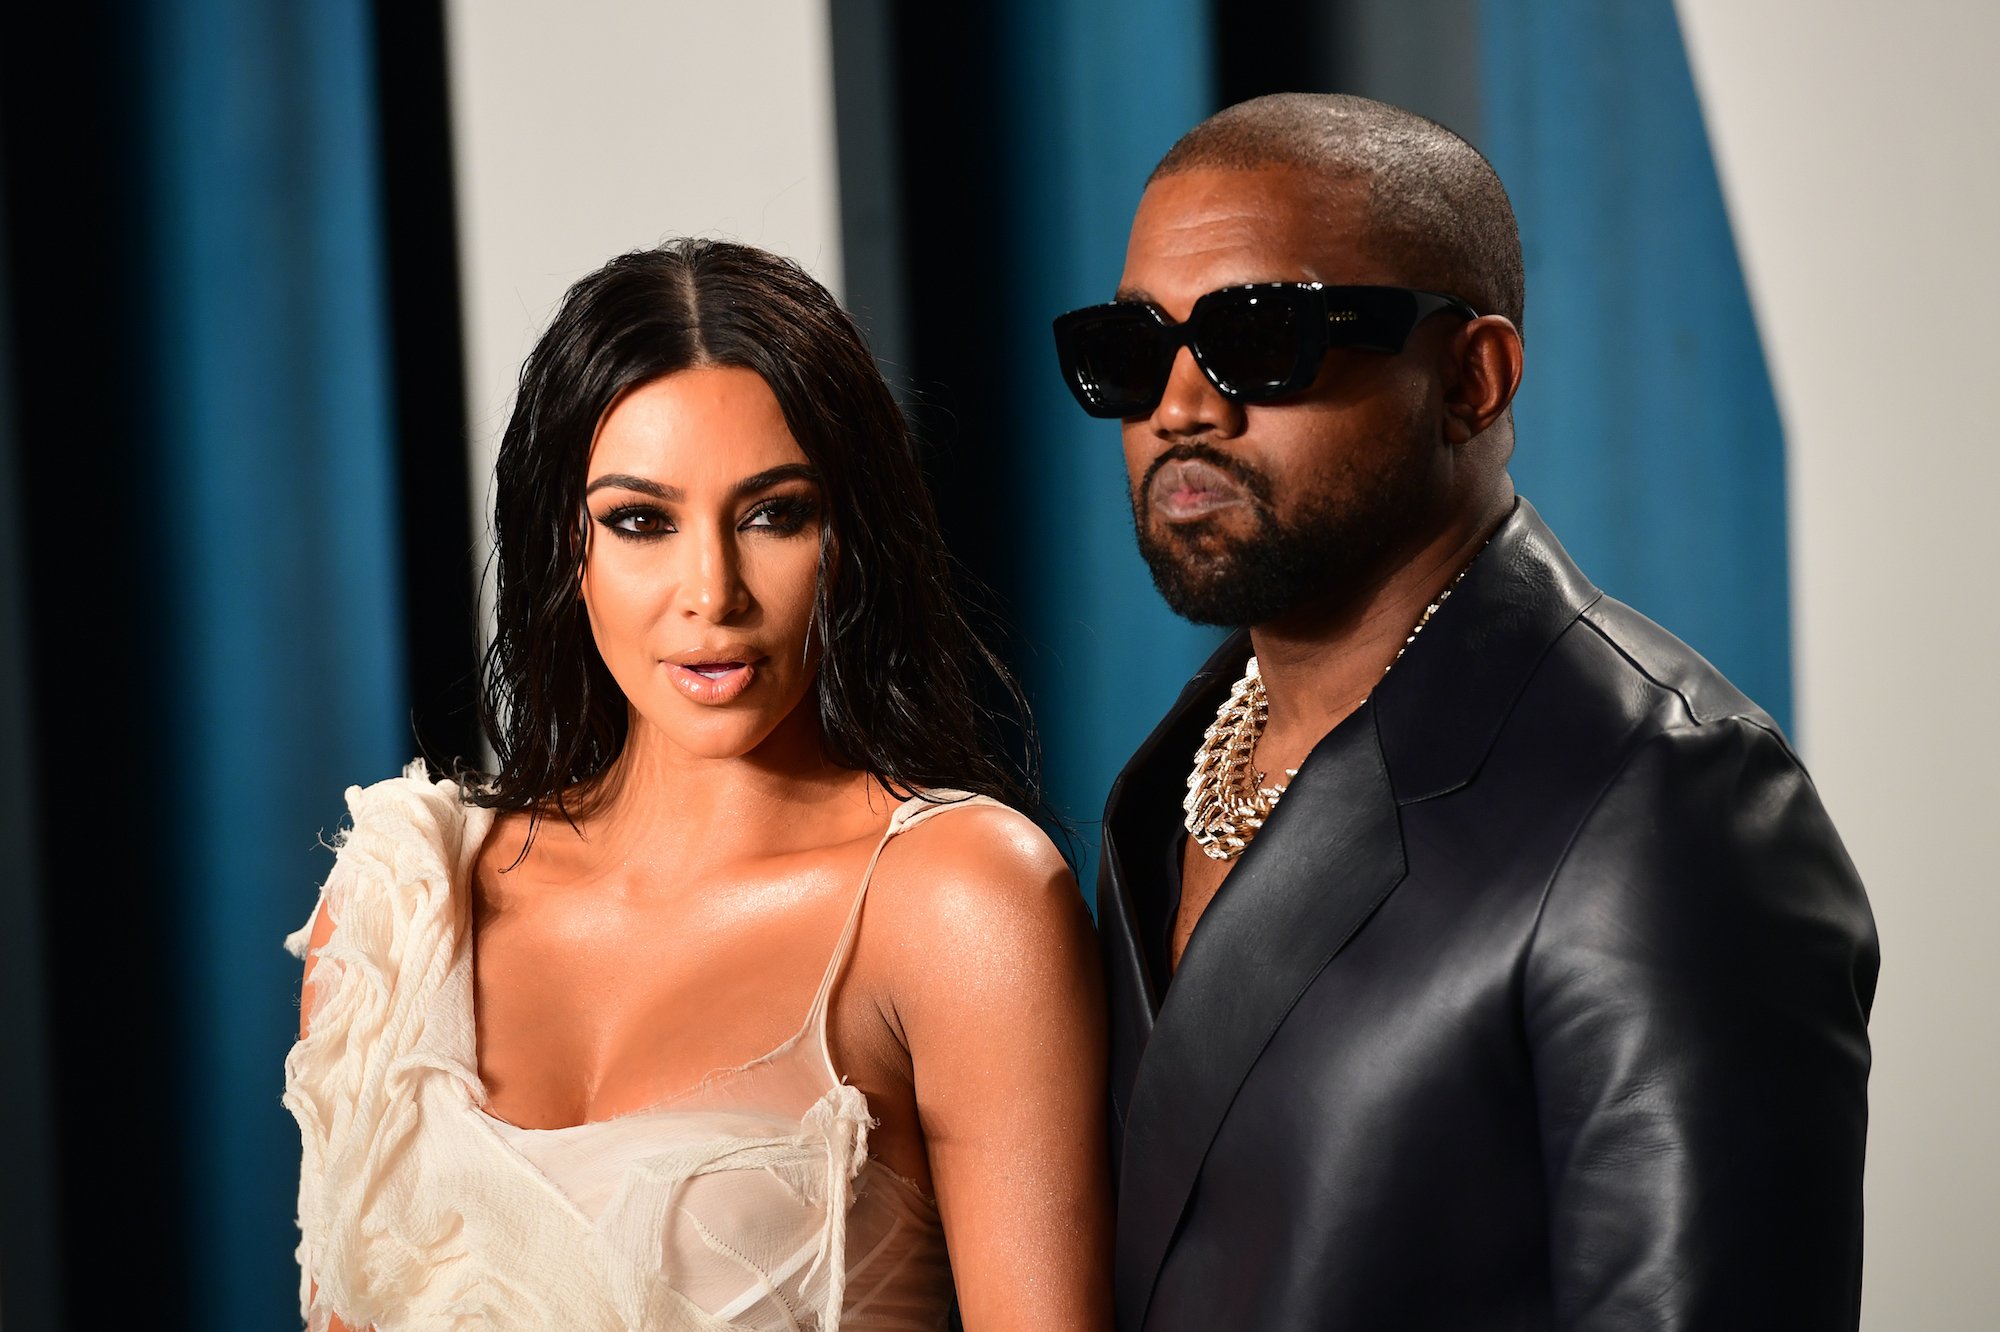 Kim Kardashian and Kanye West stand together on the red carpet at an award show.